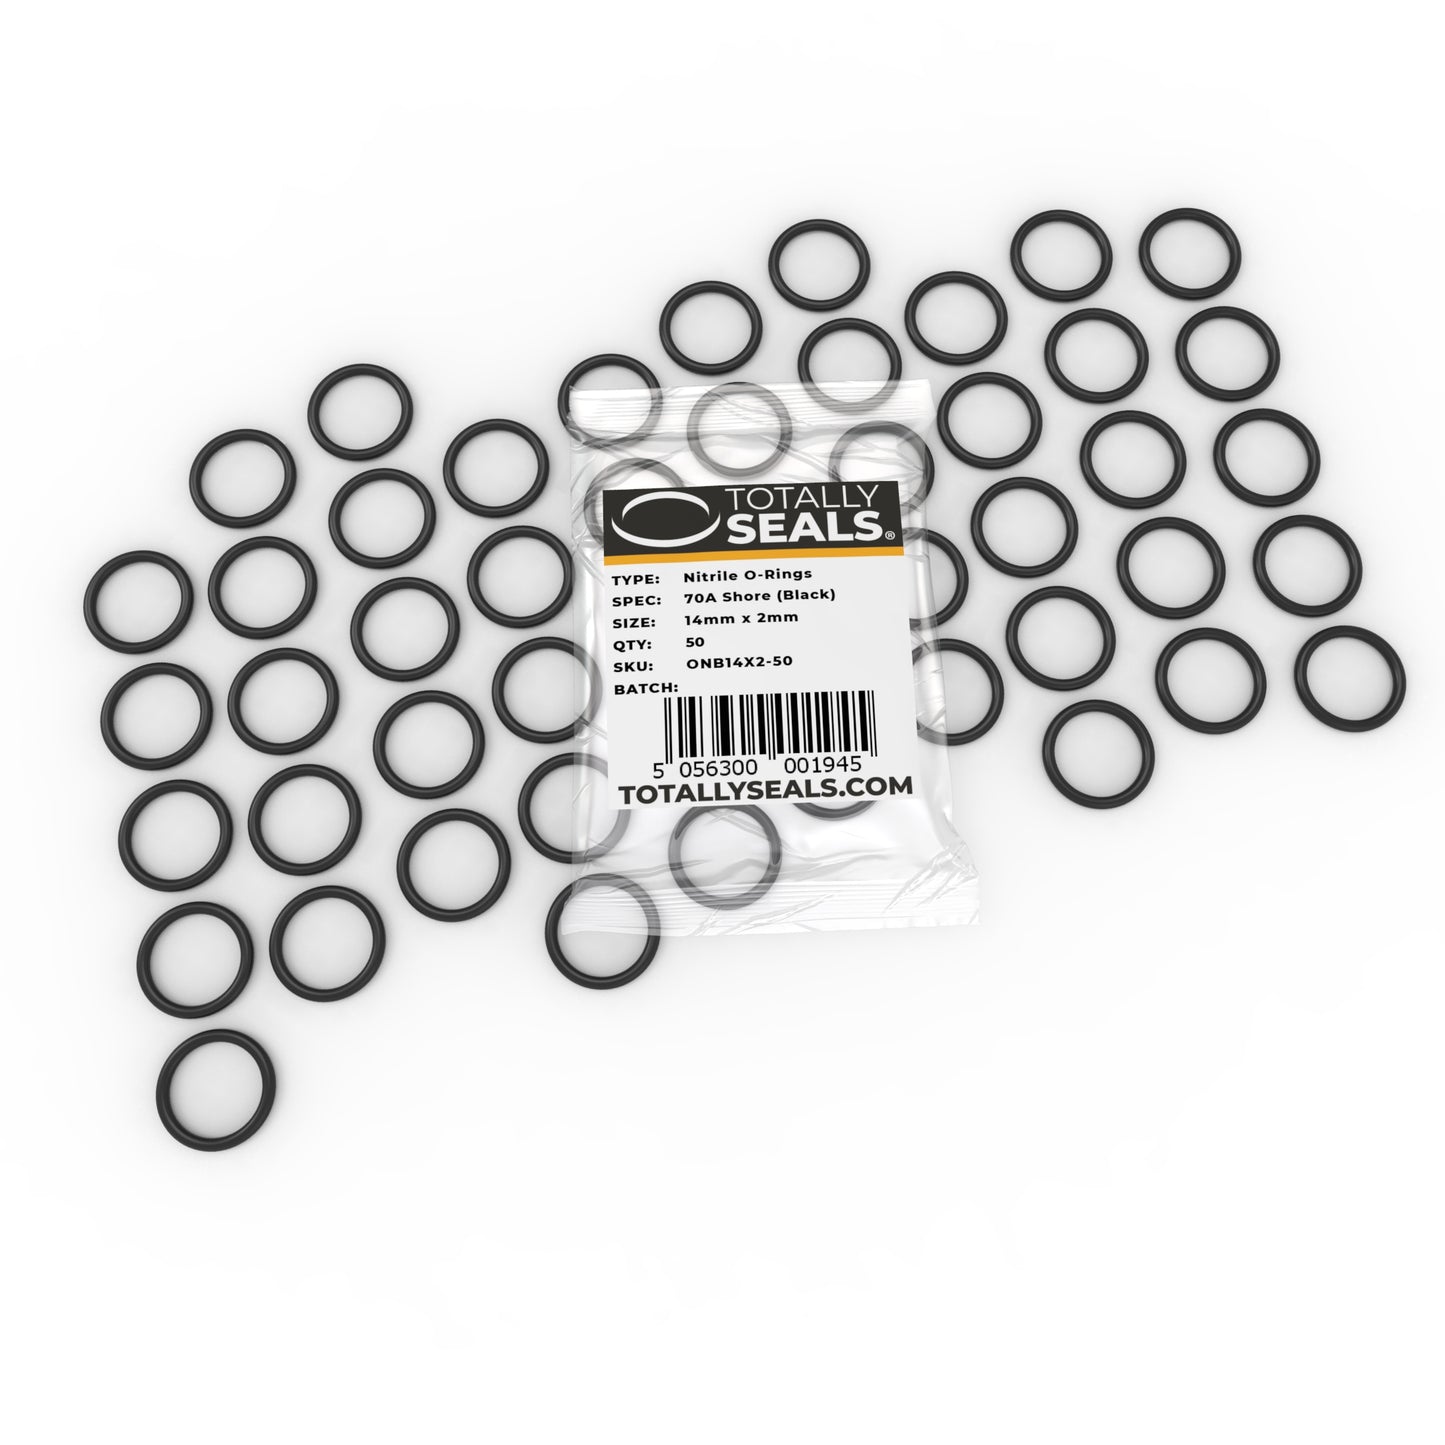 14mm x 2mm (18mm OD) Nitrile O-Rings - Totally Seals®